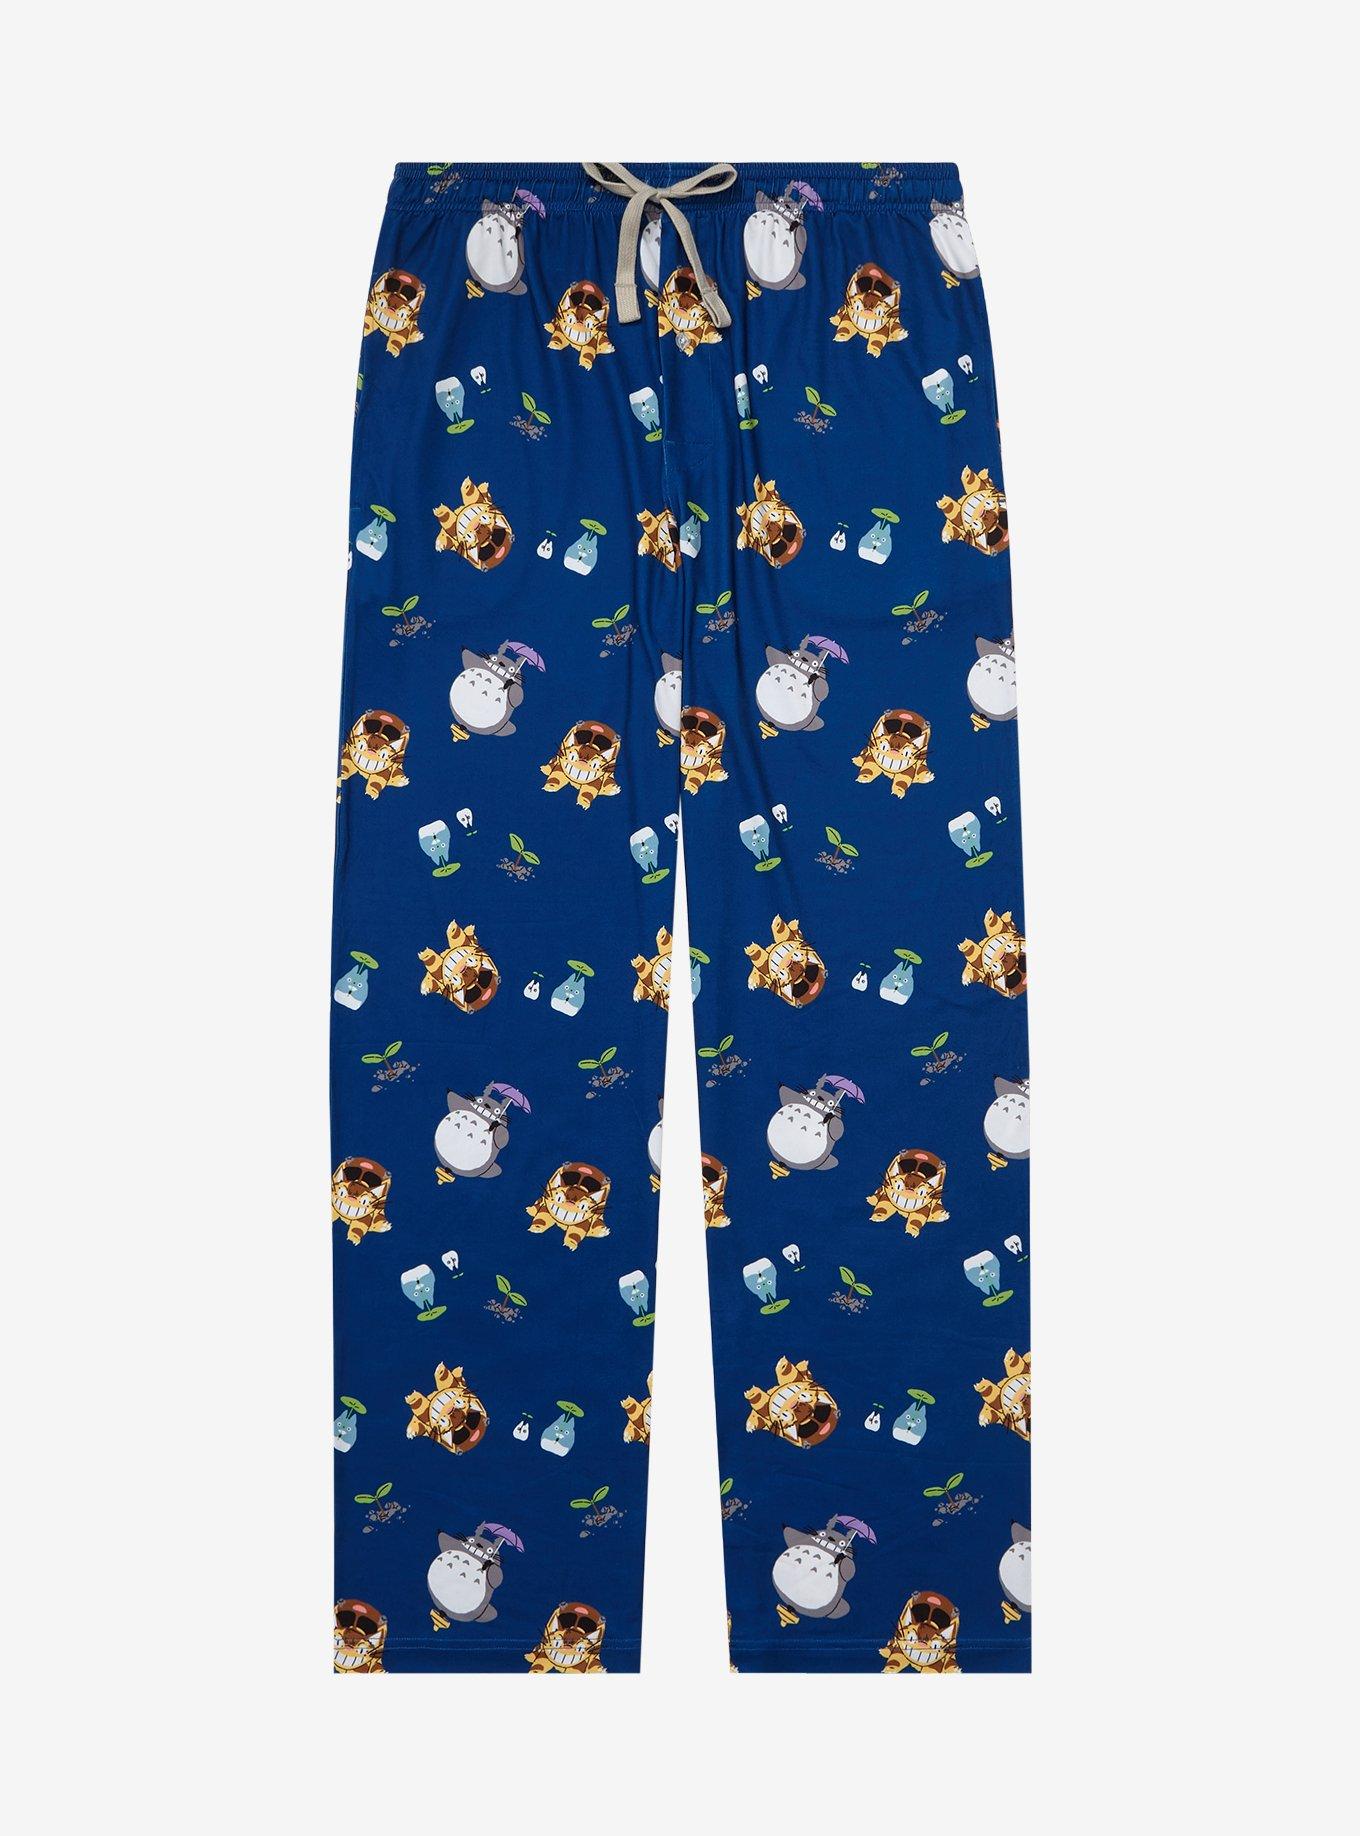 Studio Ghibli Howl's Moving Castle Calcifer Floral Allover Print Sleep Pants  - BoxLunch Exclusive